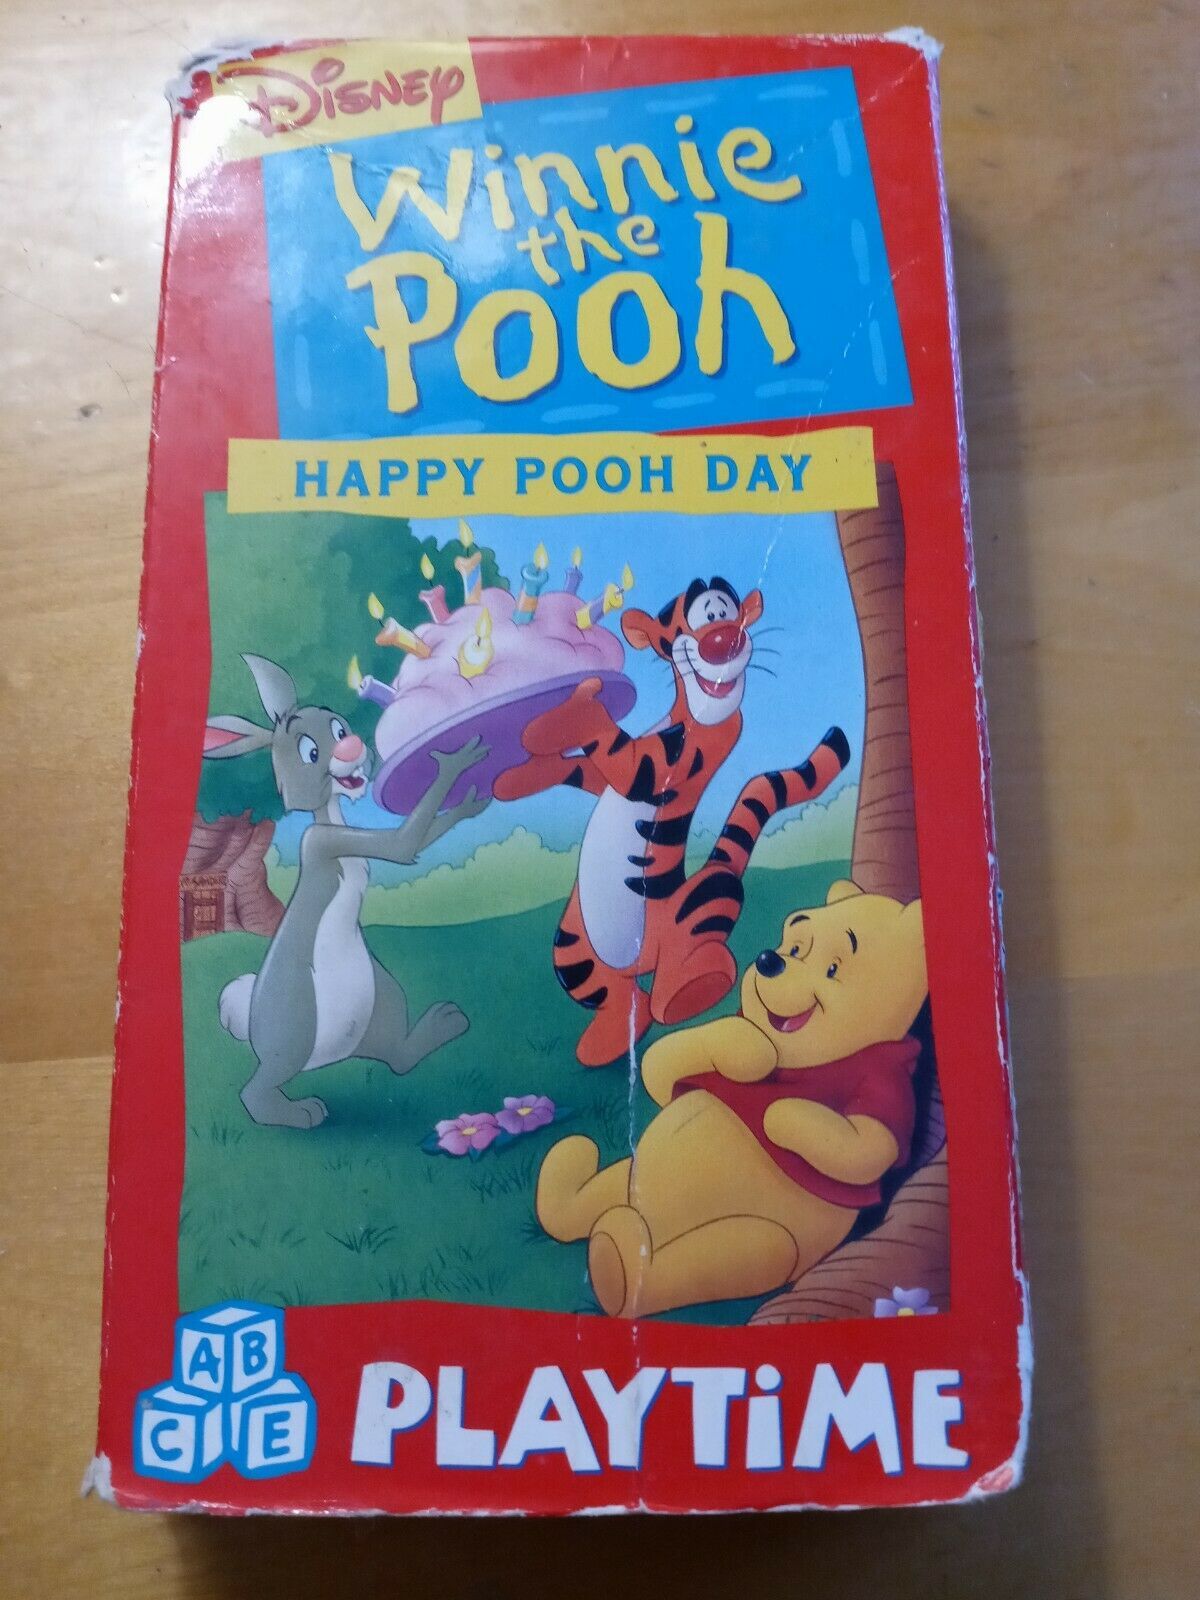 Primary image for Winnie the Pooh - Pooh Playtime - Happy Pooh Day (VHS, 1996) Walt Disney w/ case